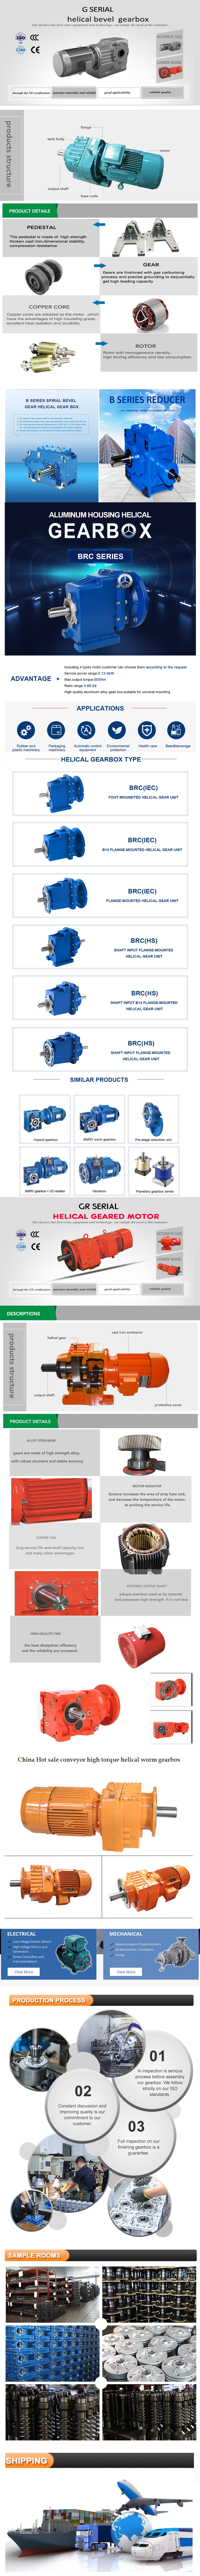   in Bali Indonesia  sales   price   shop   near me   near me shop   factory   supplier High Quality AC Motor Speed Reducer K Reducer Gear Box Motor China K Series Spiral Bevel Geared Reducer for Electric Motor manufacturer   best   Cost   Custom   Cheap   wholesaler 